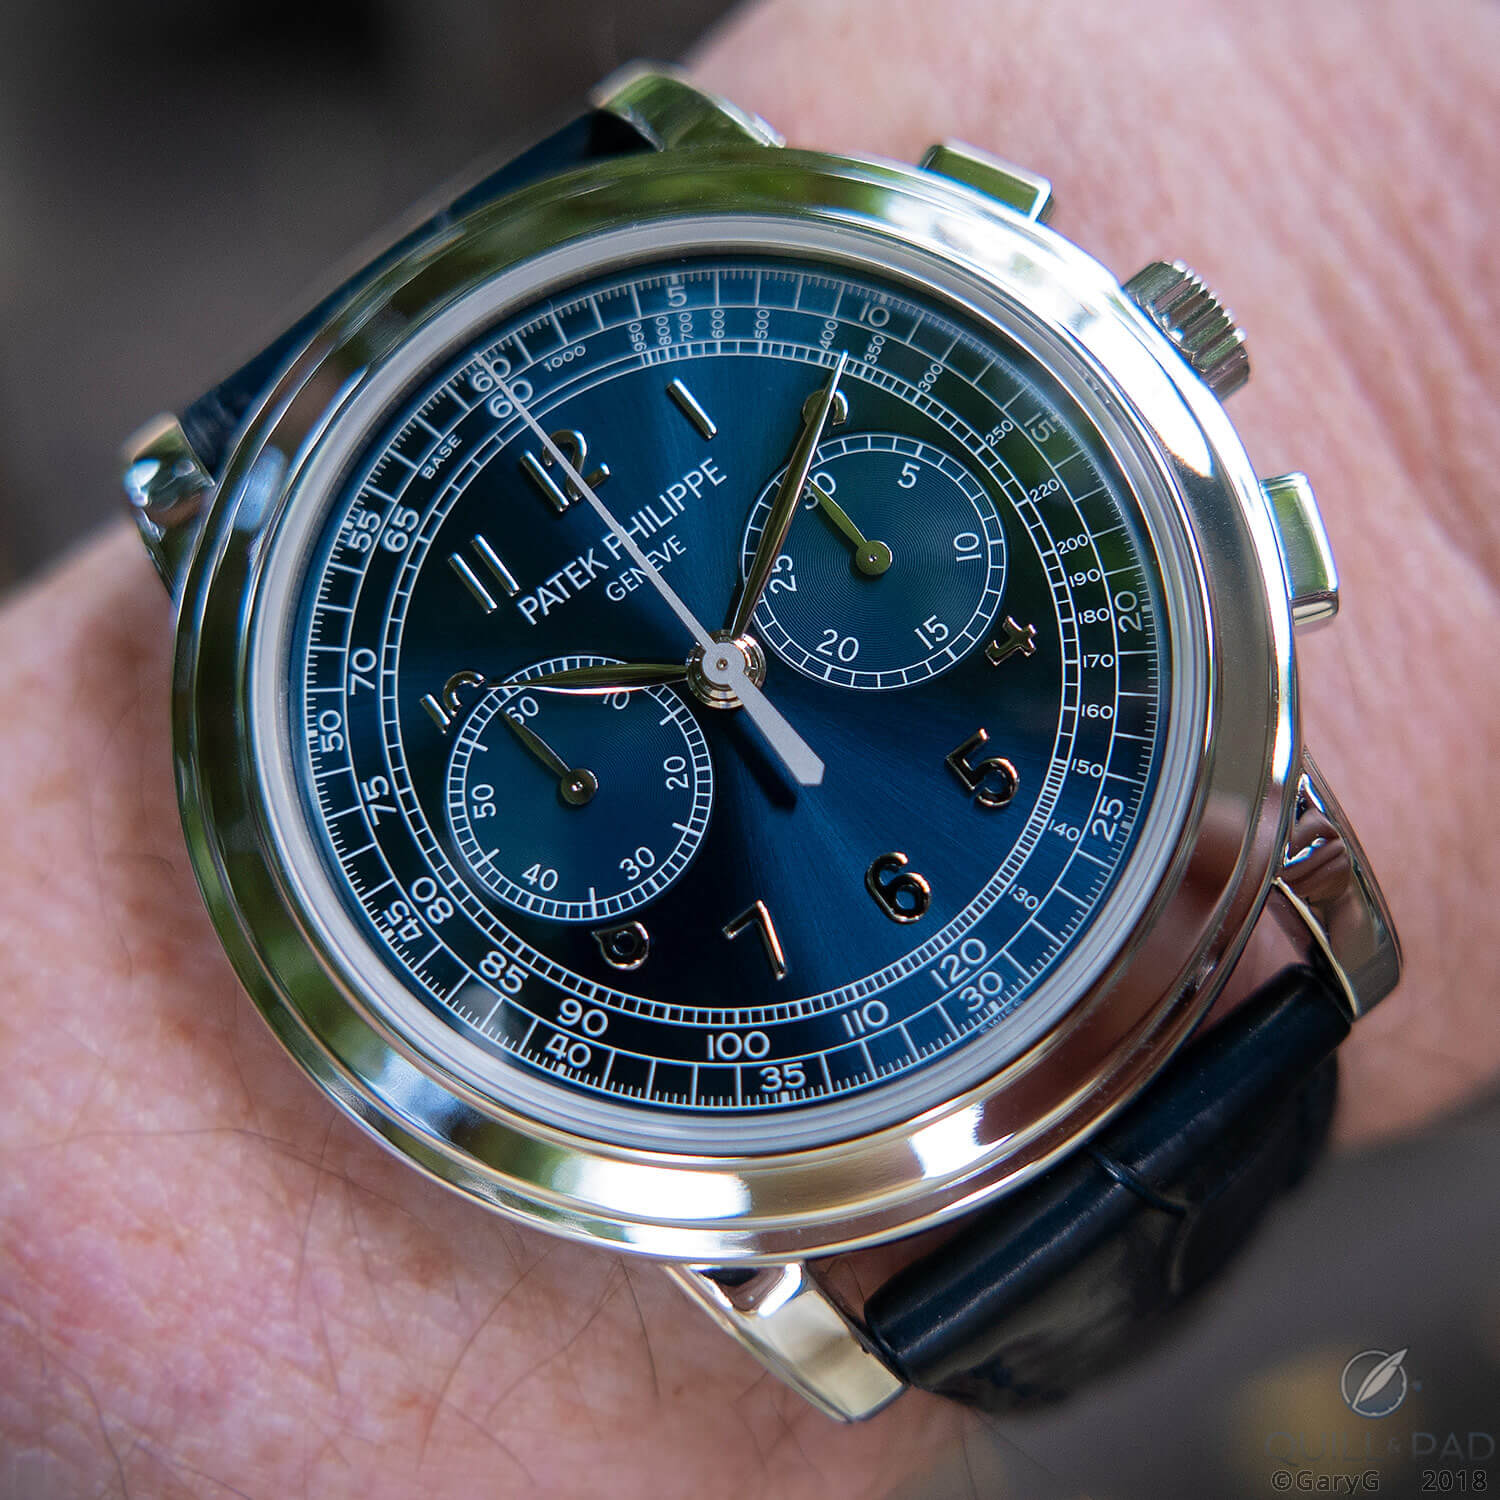 On the wrist: Patek Philippe Reference 5070P-013 “London”